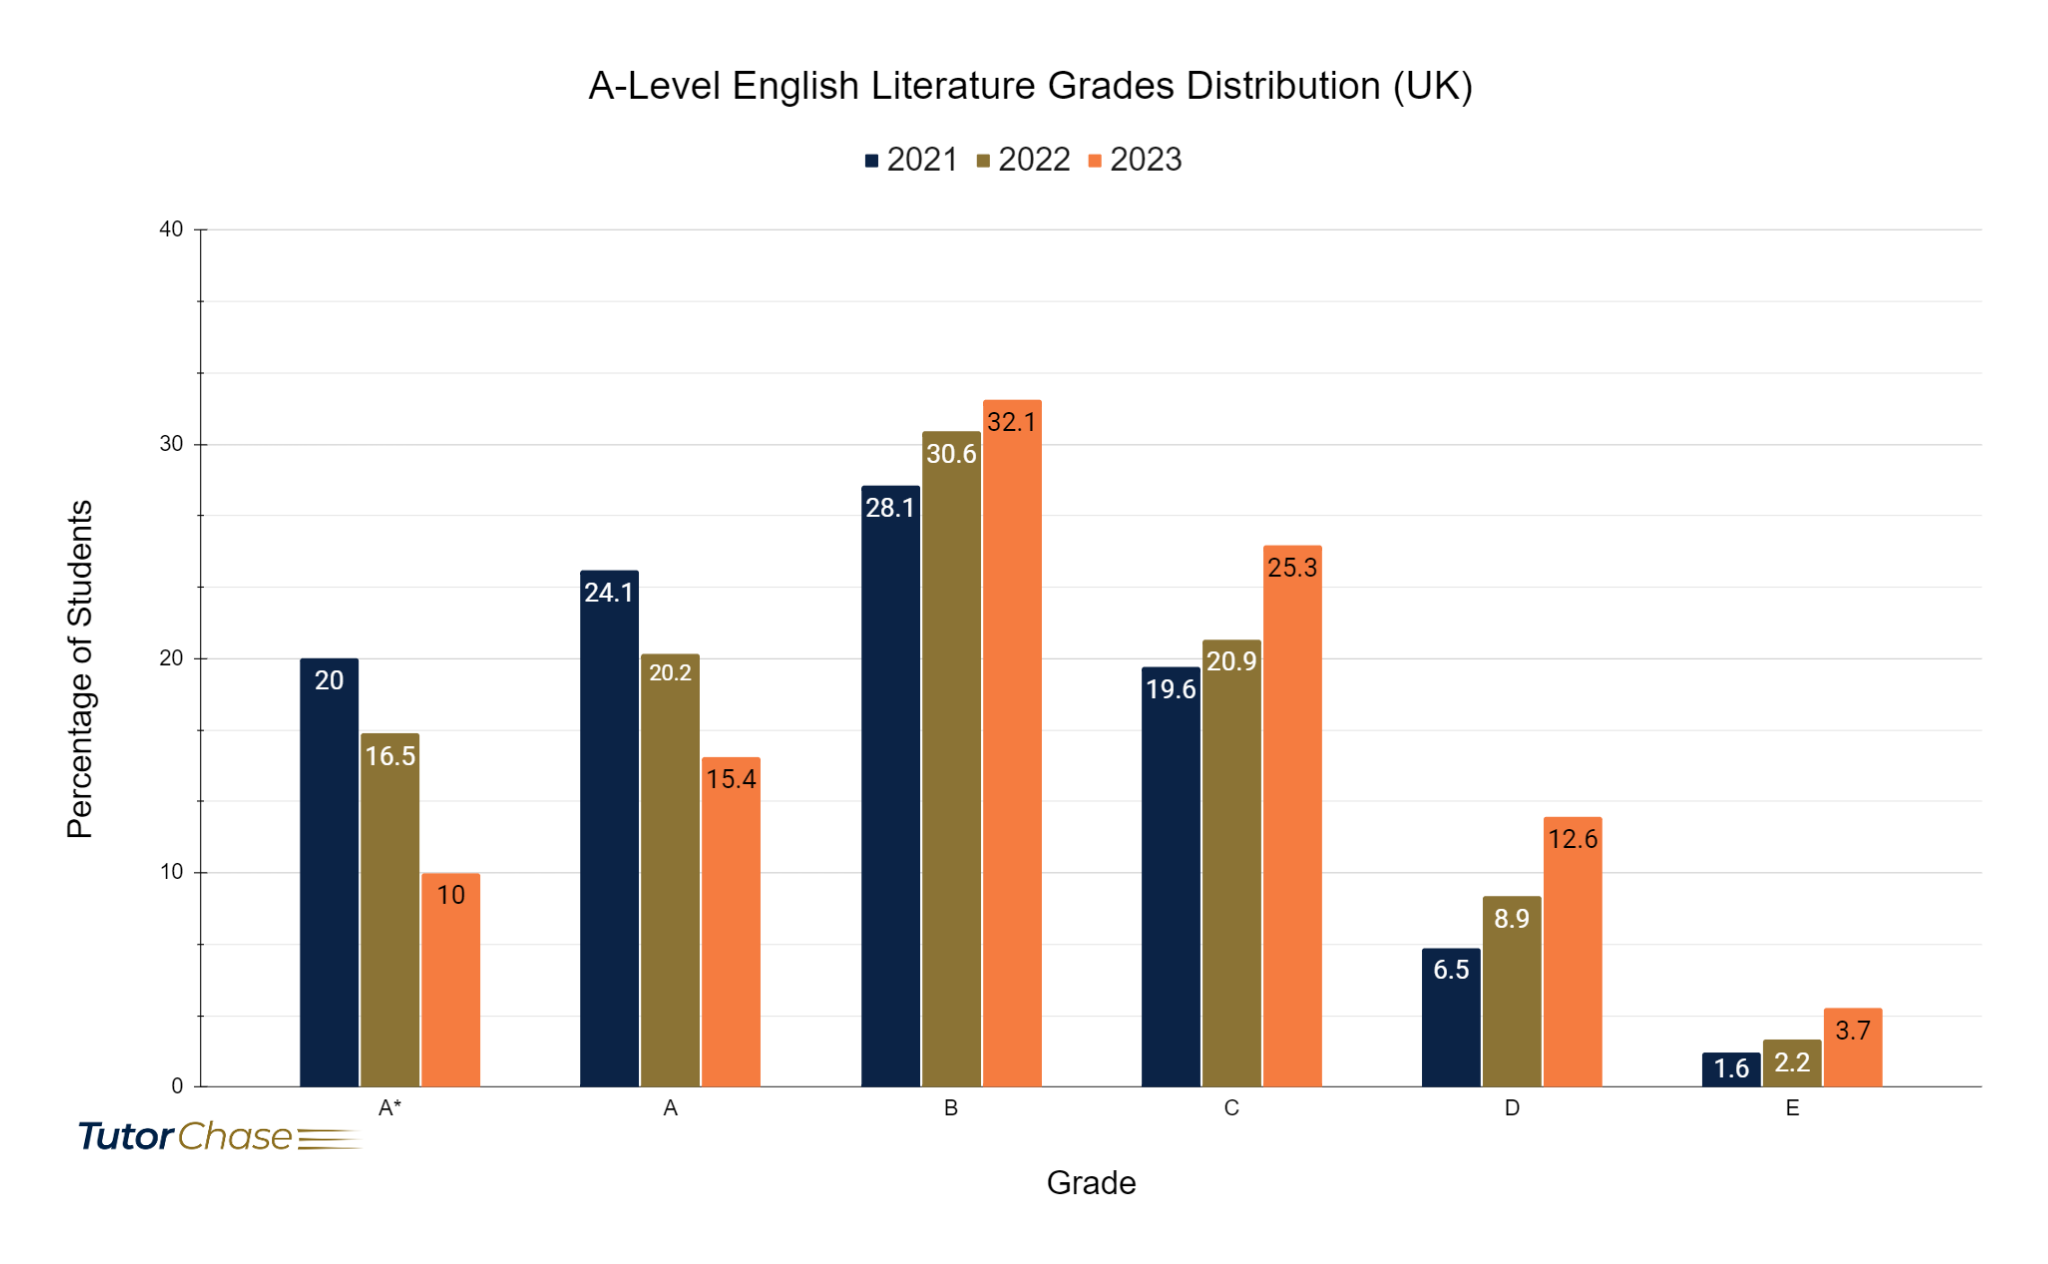 Grades distribution of A-Level English Literature in UK 2021-2023